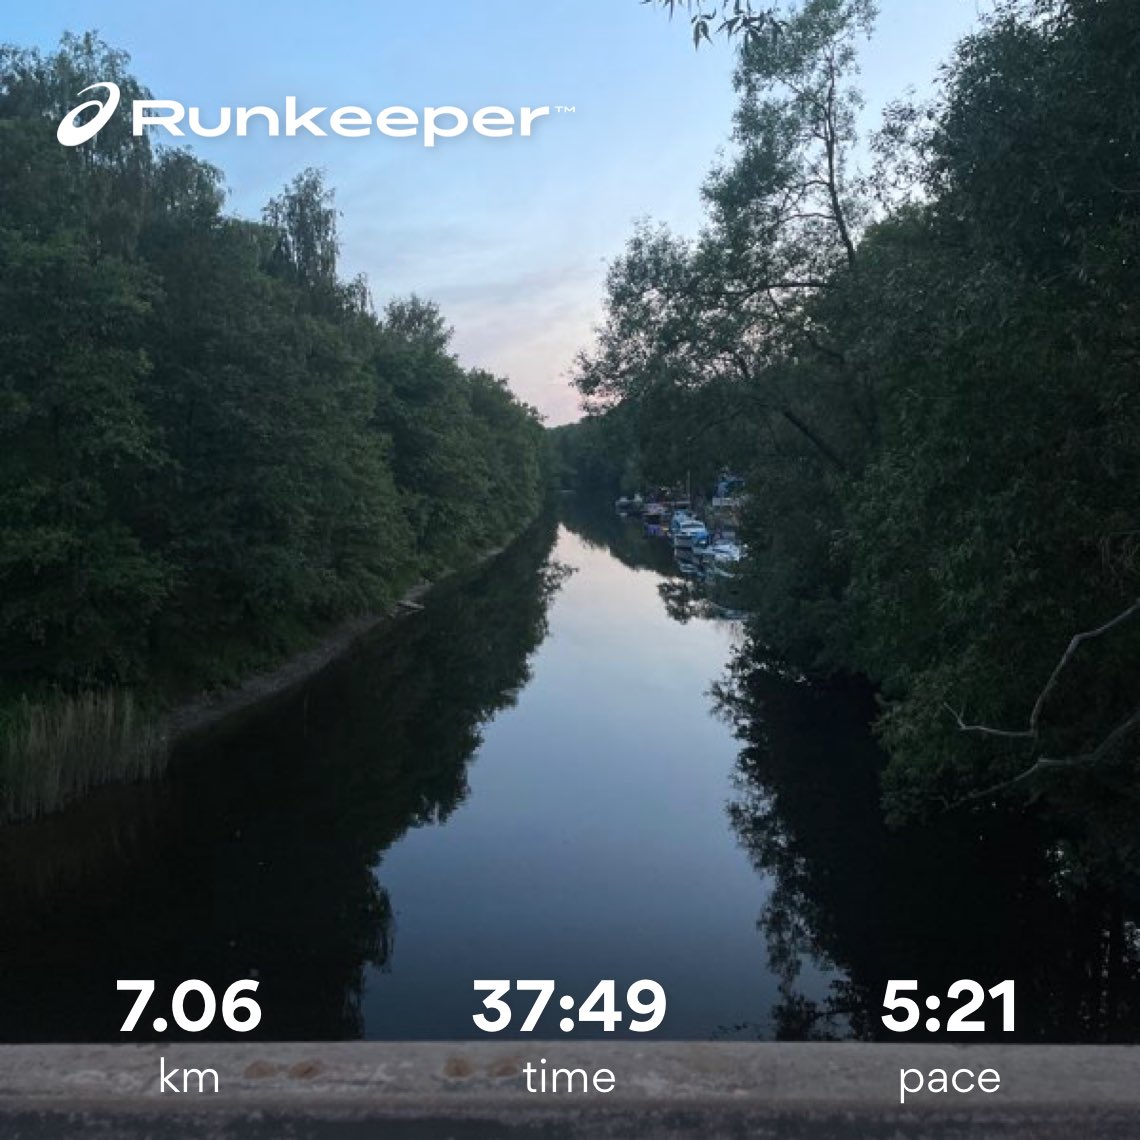 Slow and leisurely #run pushing 7K! 🏃‍♂️👟 But does it earn me a guilt-free slice or two of cheesy pizza? 🍕🍕

#Fitness #BackToRunning #RunnersHigh #Cardio #Workout #Motivation #GetMoving #5K #RunningCommunity #Runner ⁦@Runkeeper⁩